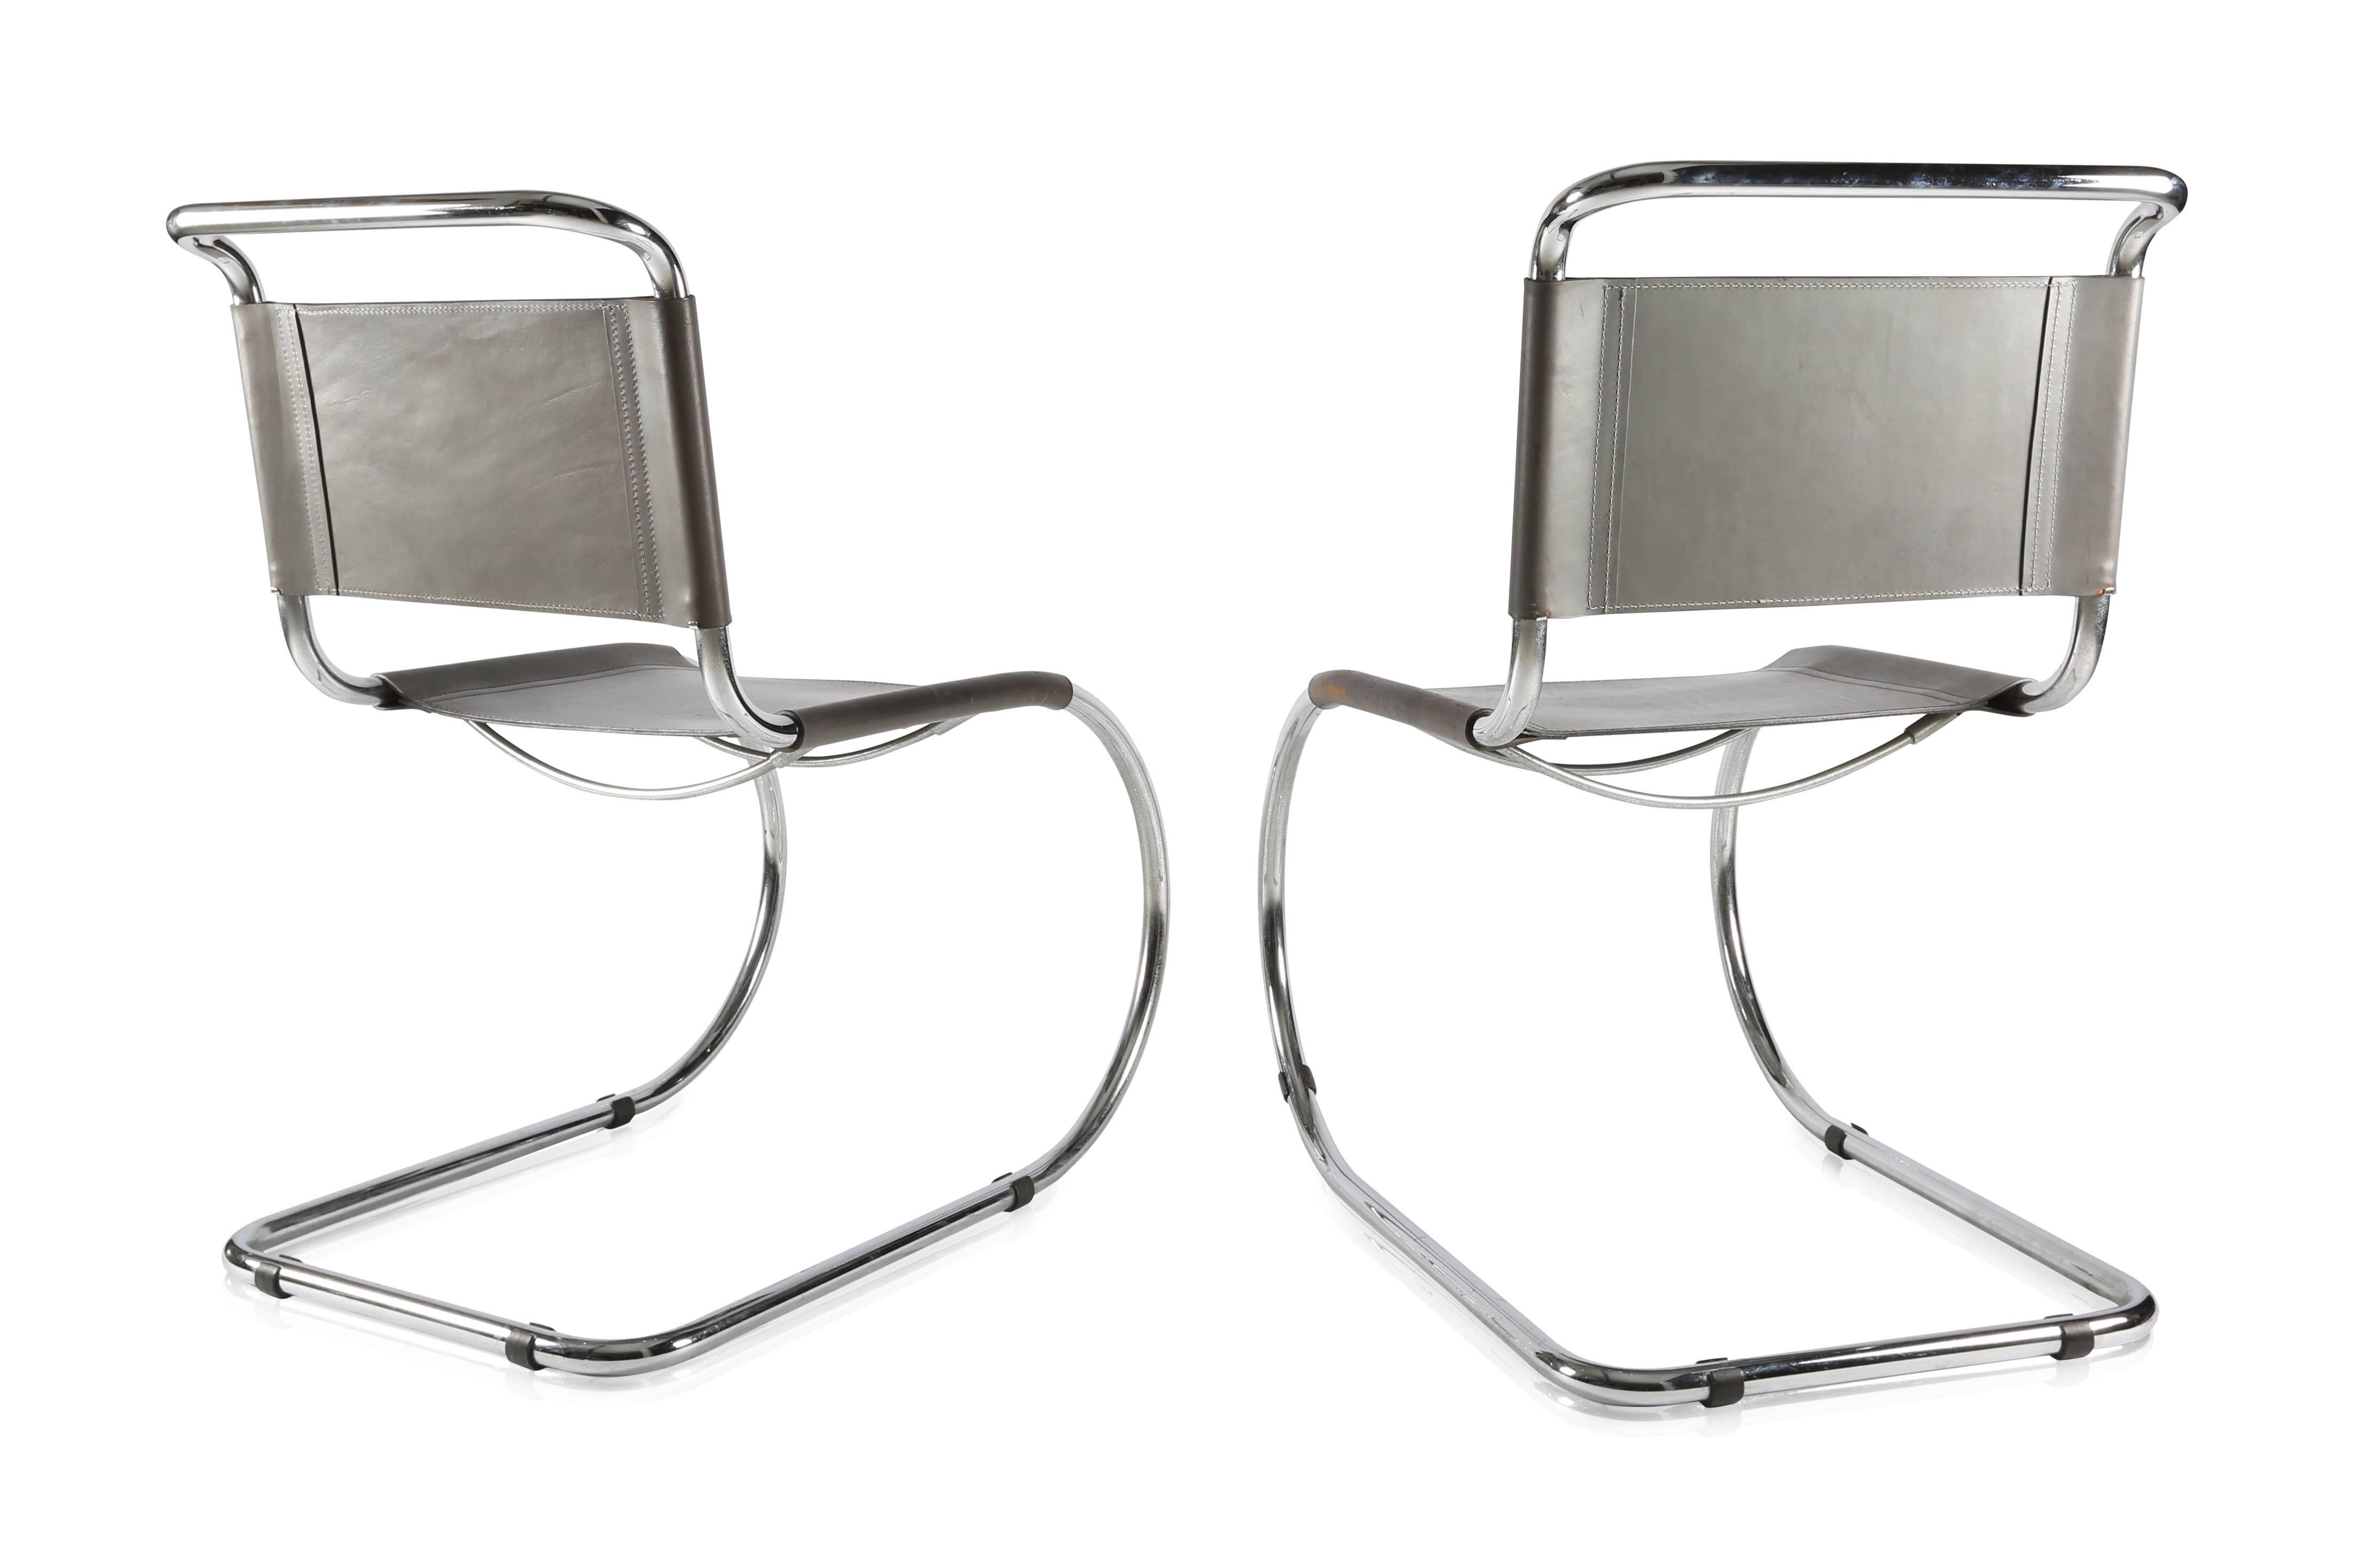 Mid-Century Modern Mies van der Rohe’s MR Cantilever Chairs